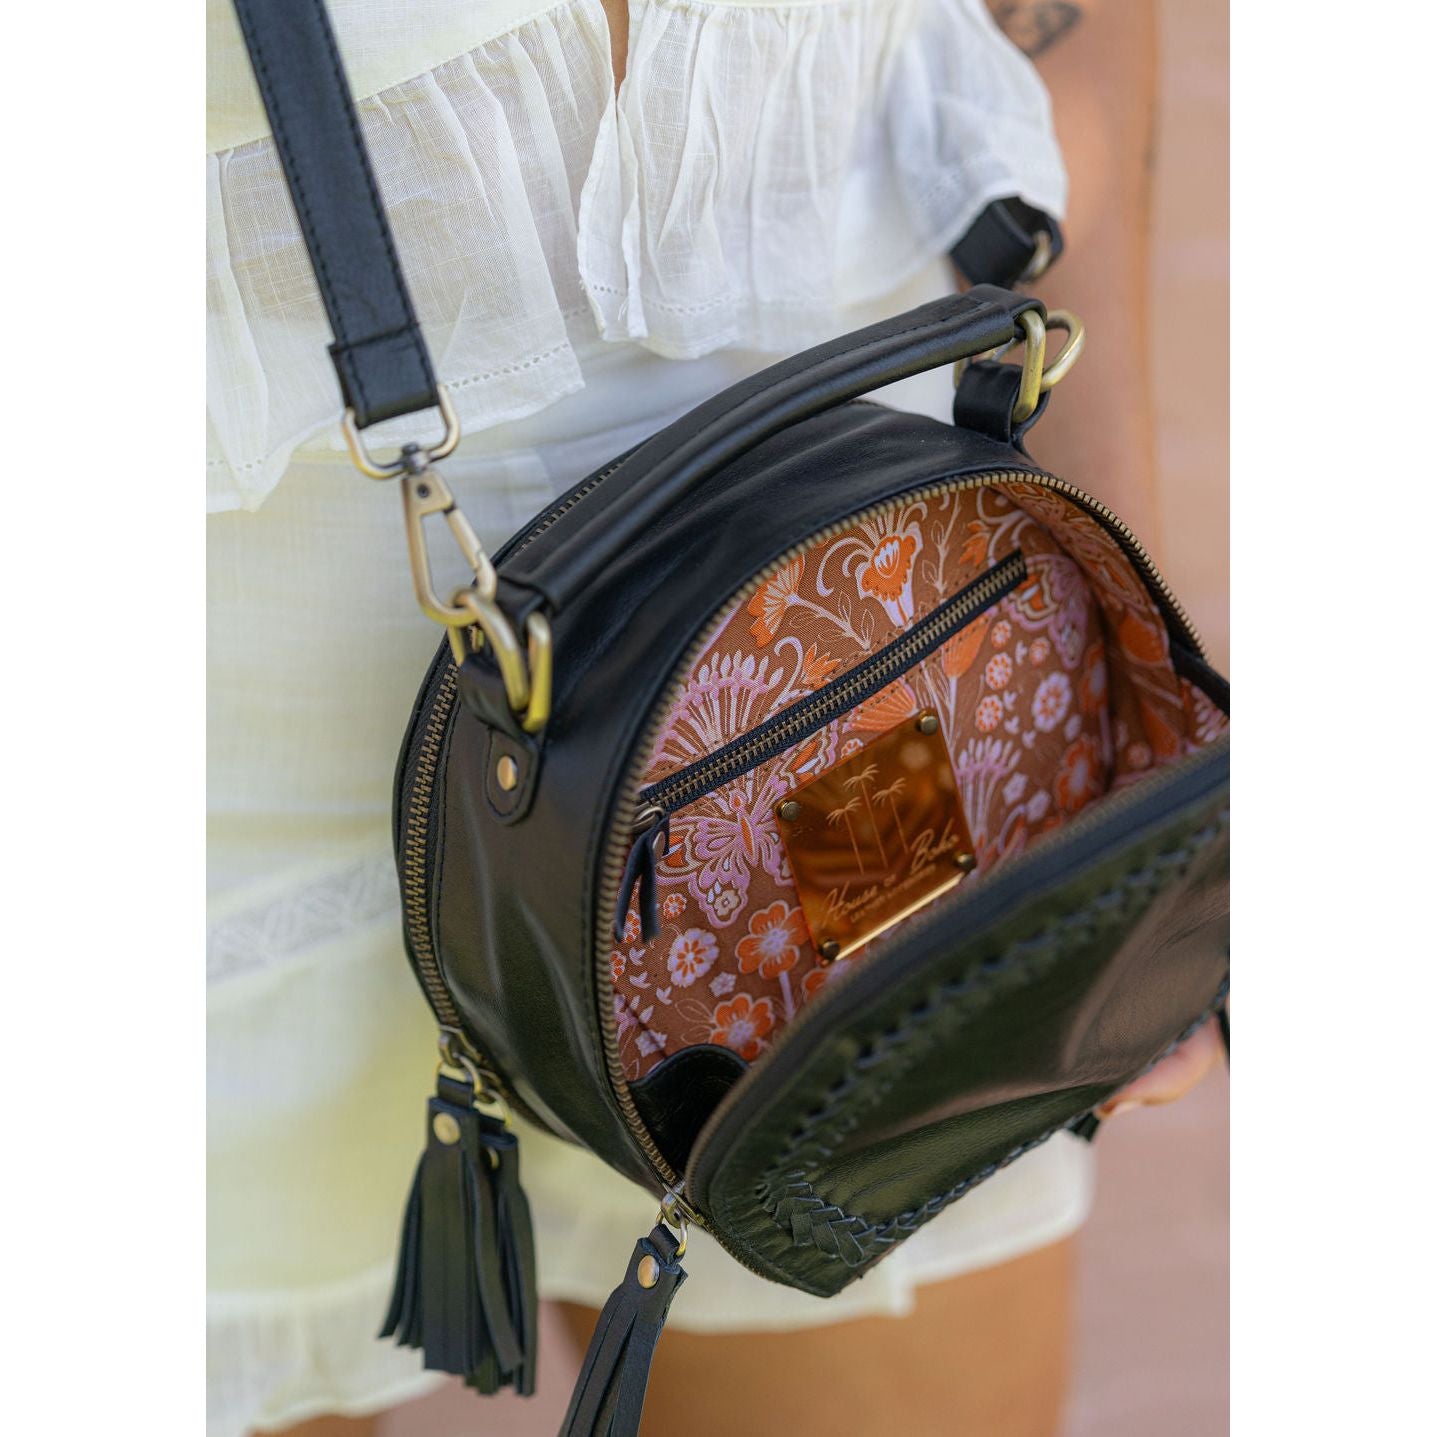 Small Darby Bag Black SALE $169 now $90